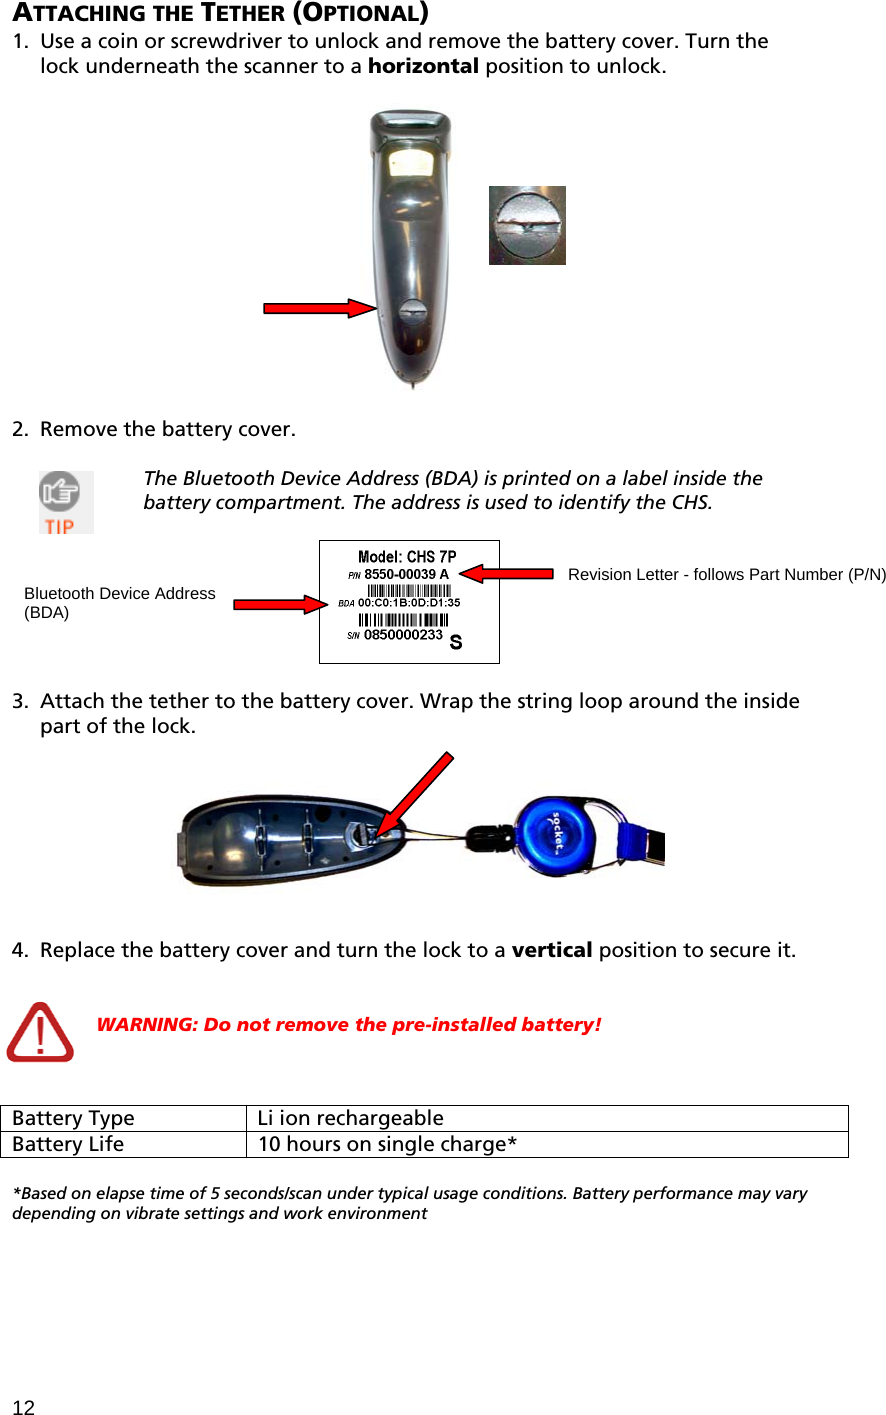 12 ATTACHING THE TETHER (OPTIONAL) 1. Use a coin or screwdriver to unlock and remove the battery cover. Turn the lock underneath the scanner to a horizontal position to unlock.     2. Remove the battery cover.  The Bluetooth Device Address (BDA) is printed on a label inside the battery compartment. The address is used to identify the CHS.    3. Attach the tether to the battery cover. Wrap the string loop around the inside part of the lock.      4. Replace the battery cover and turn the lock to a vertical position to secure it.   WARNING: Do not remove the pre-installed battery!    Battery Type  Li ion rechargeable Battery Life  10 hours on single charge*  *Based on elapse time of 5 seconds/scan under typical usage conditions. Battery performance may vary depending on vibrate settings and work environment  Revision Letter - follows Part Number (P/N) Bluetooth Device Address (BDA) 